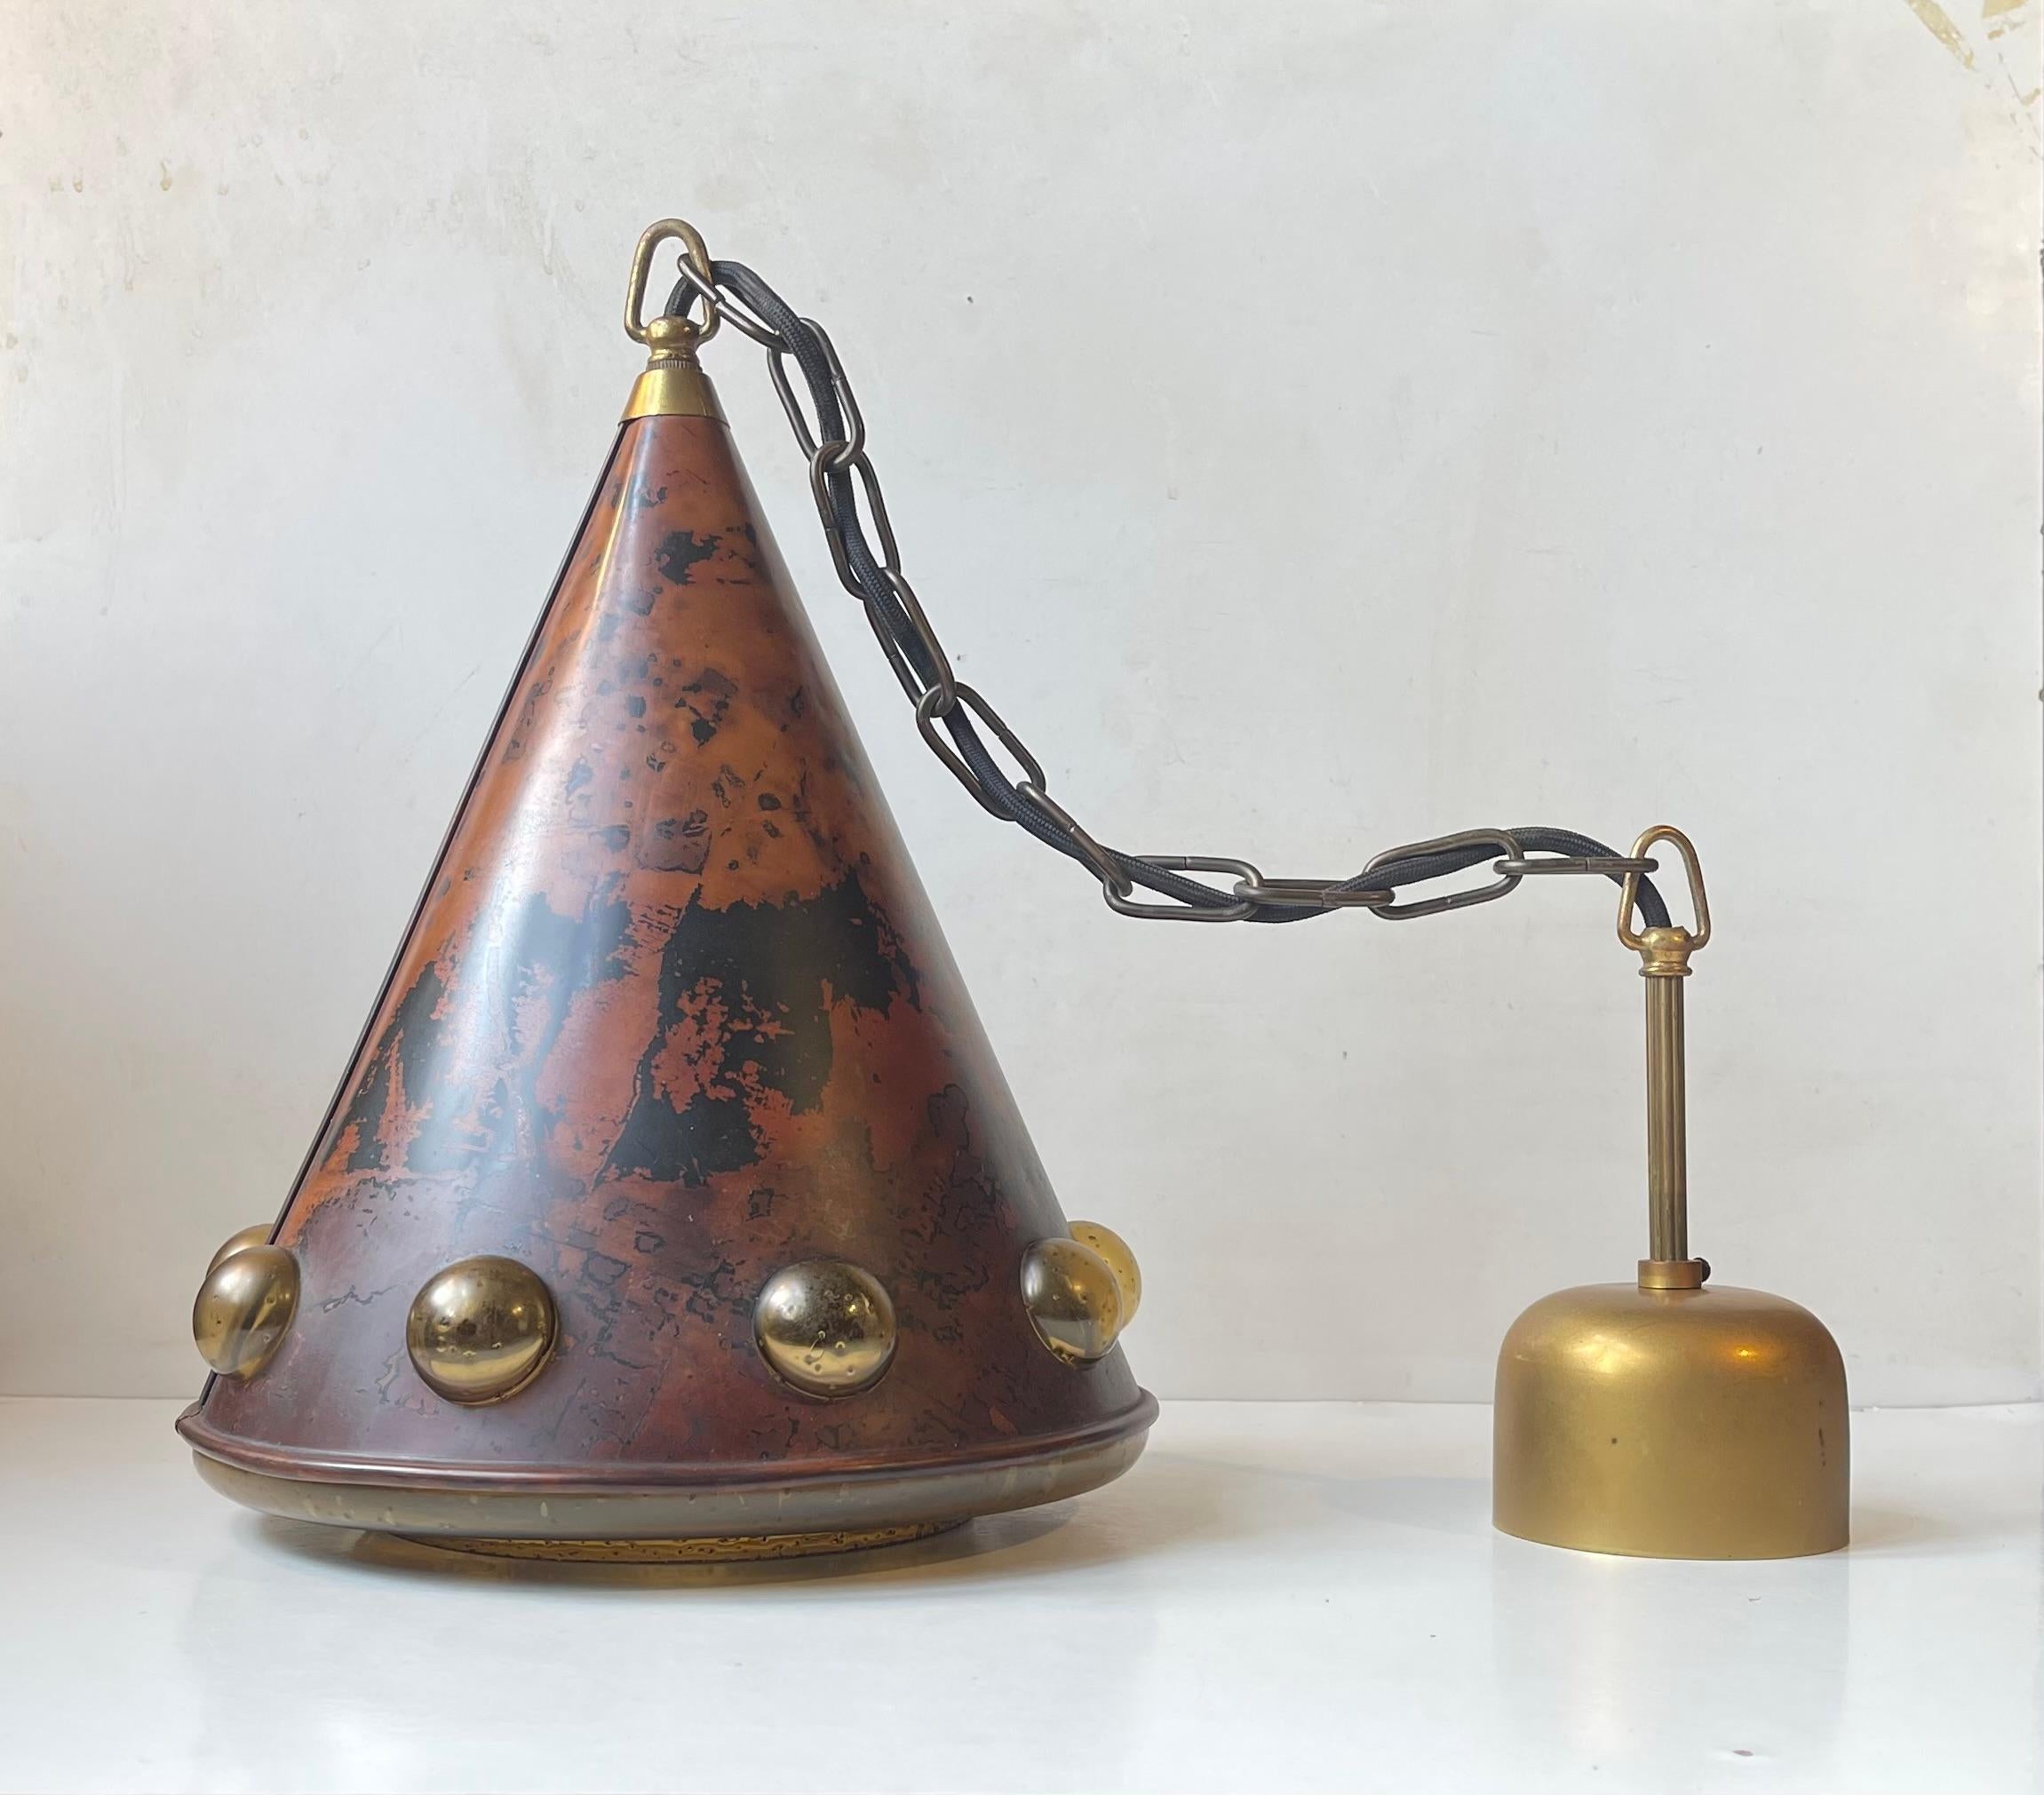 Acid-treated copper hanging light with an interior blown amber glass shade with penetrating bubbles. It was designed by female Finnish designer Nanny Still in the 1960s and manufactured by Raak Amsterdam. It comes chain-suspended and with its